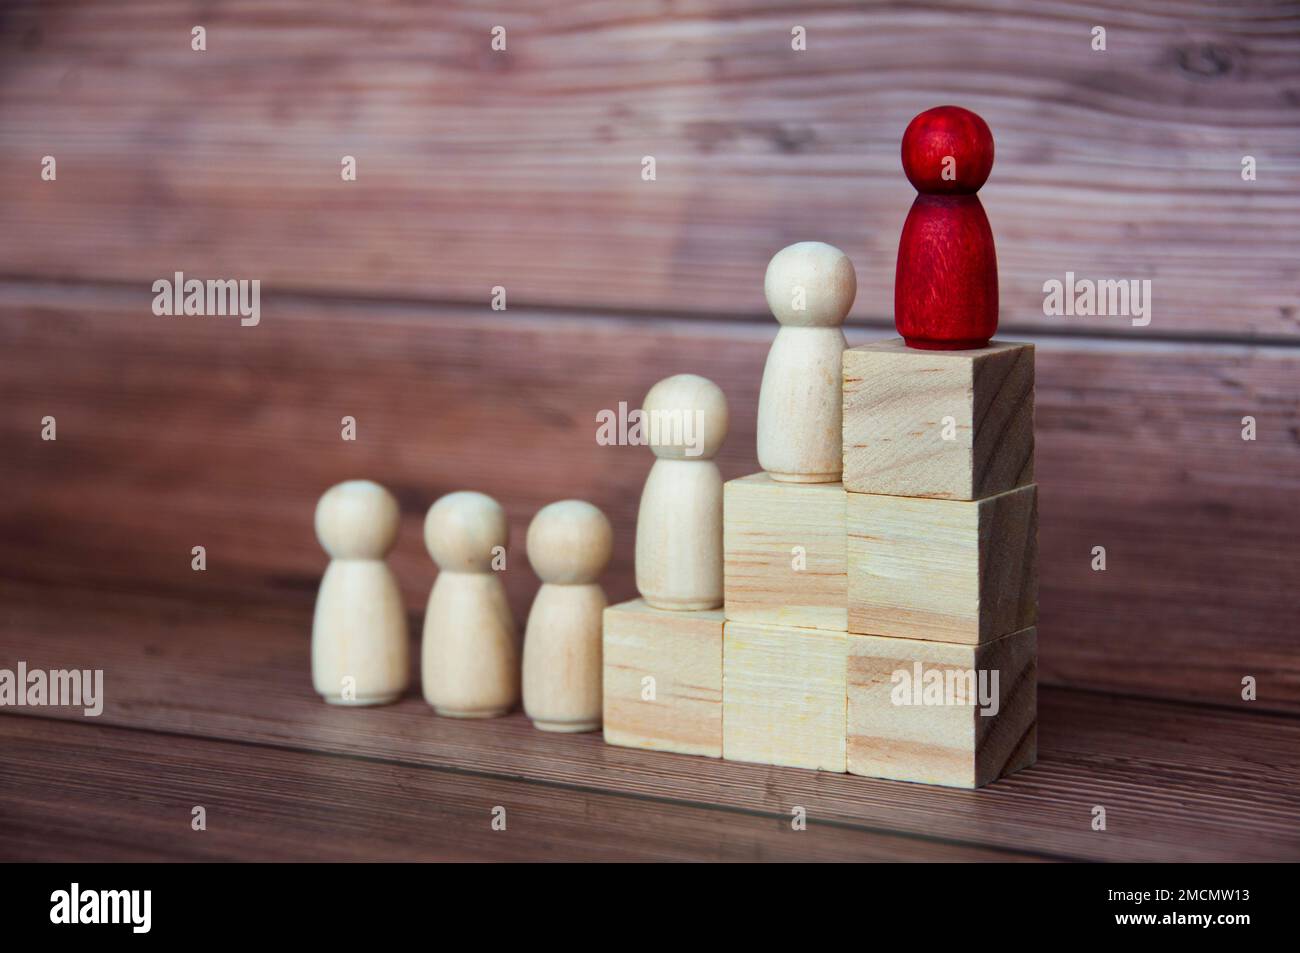 Red figure on top of wooden blocks leading other figures to success. Leadership and business culture concept. Stock Photo